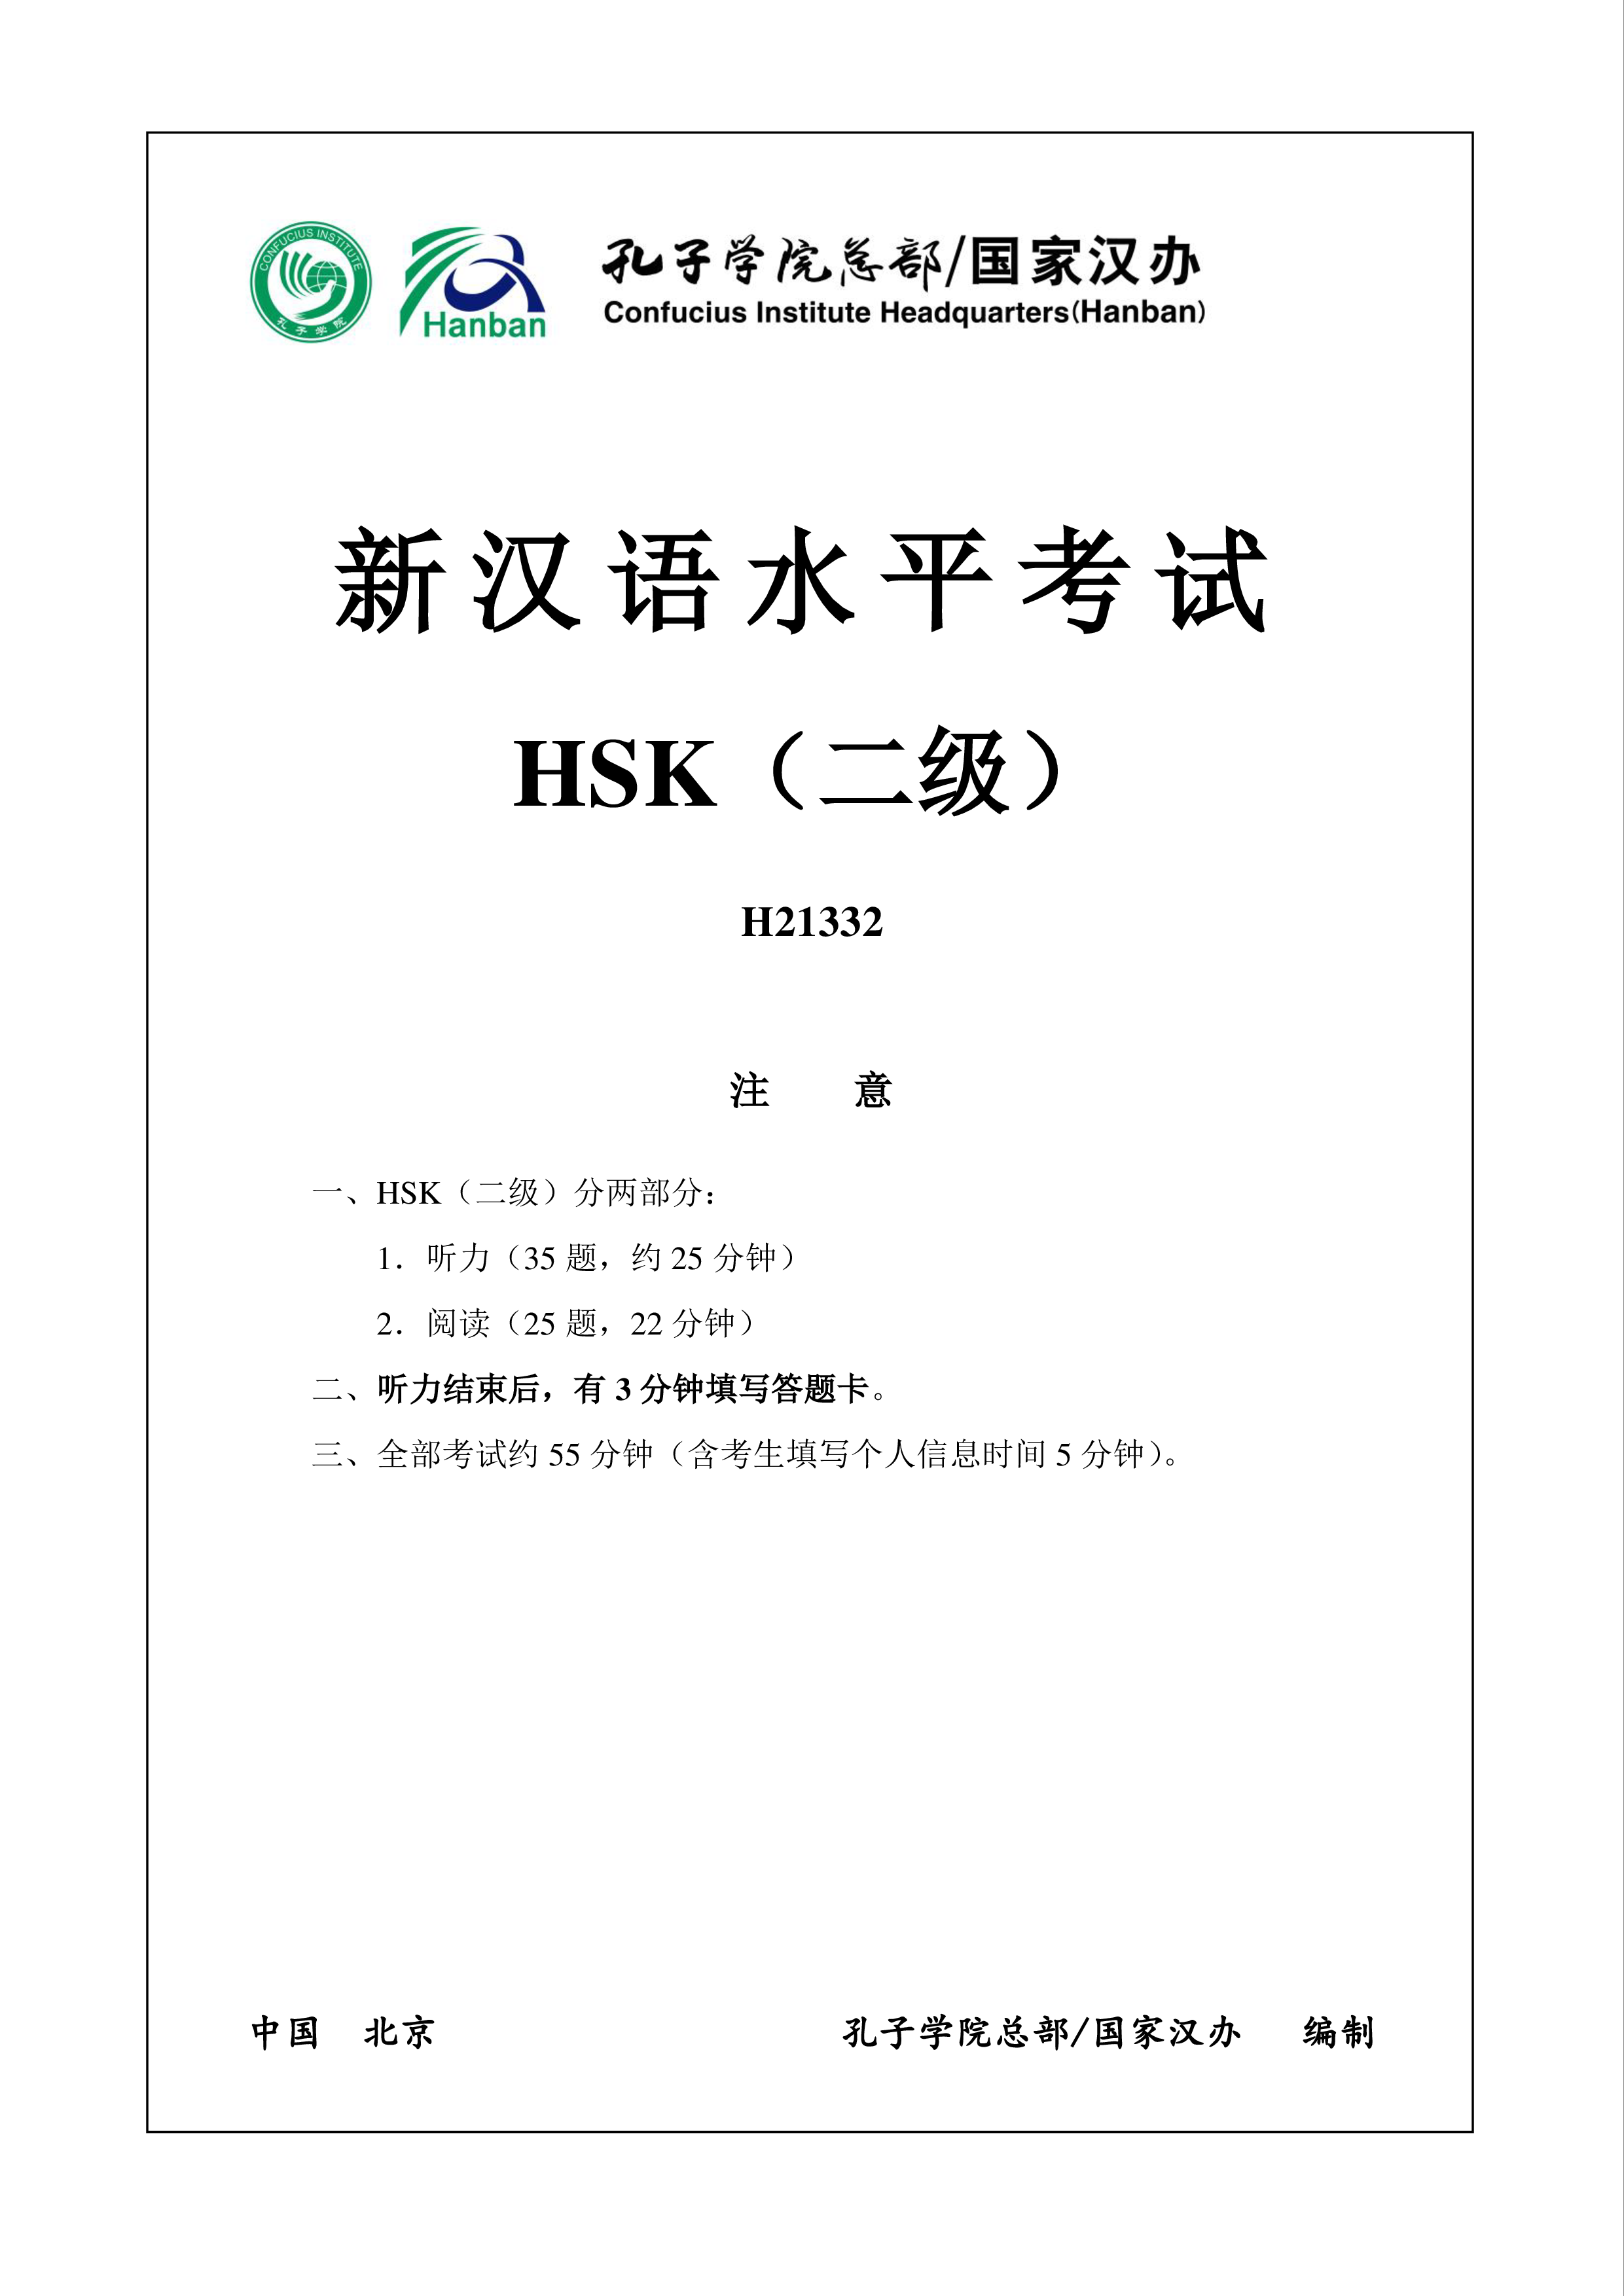 HSK2 Chinese Exam including Answers # HSK2 H21332 main image